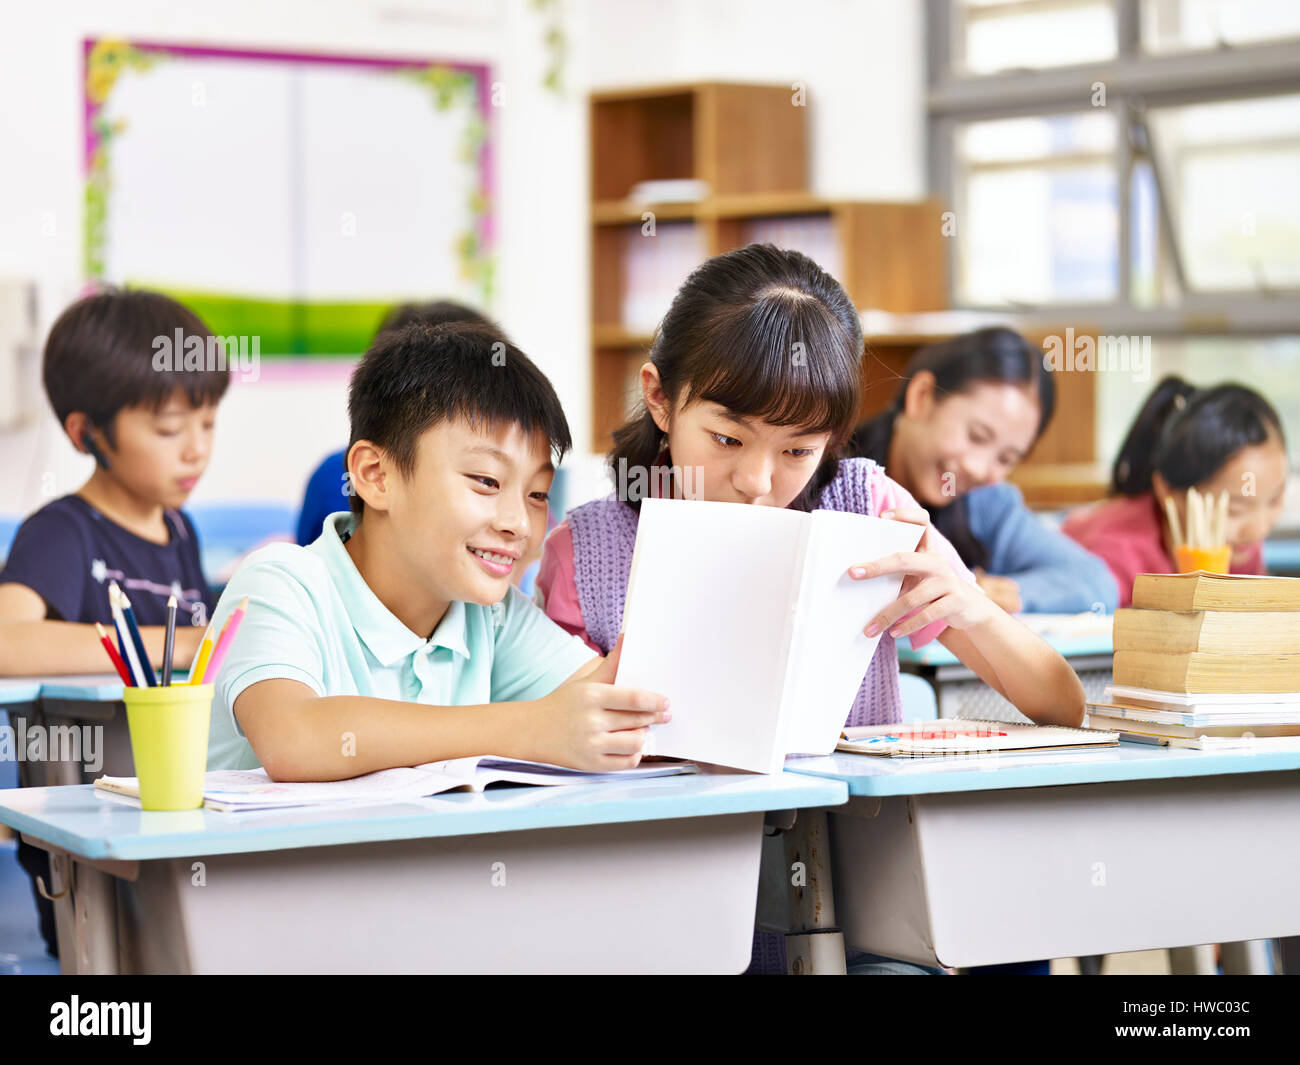 asian elementary schoolgirl and schoolboy sharing a book in classroom. Stock Photo